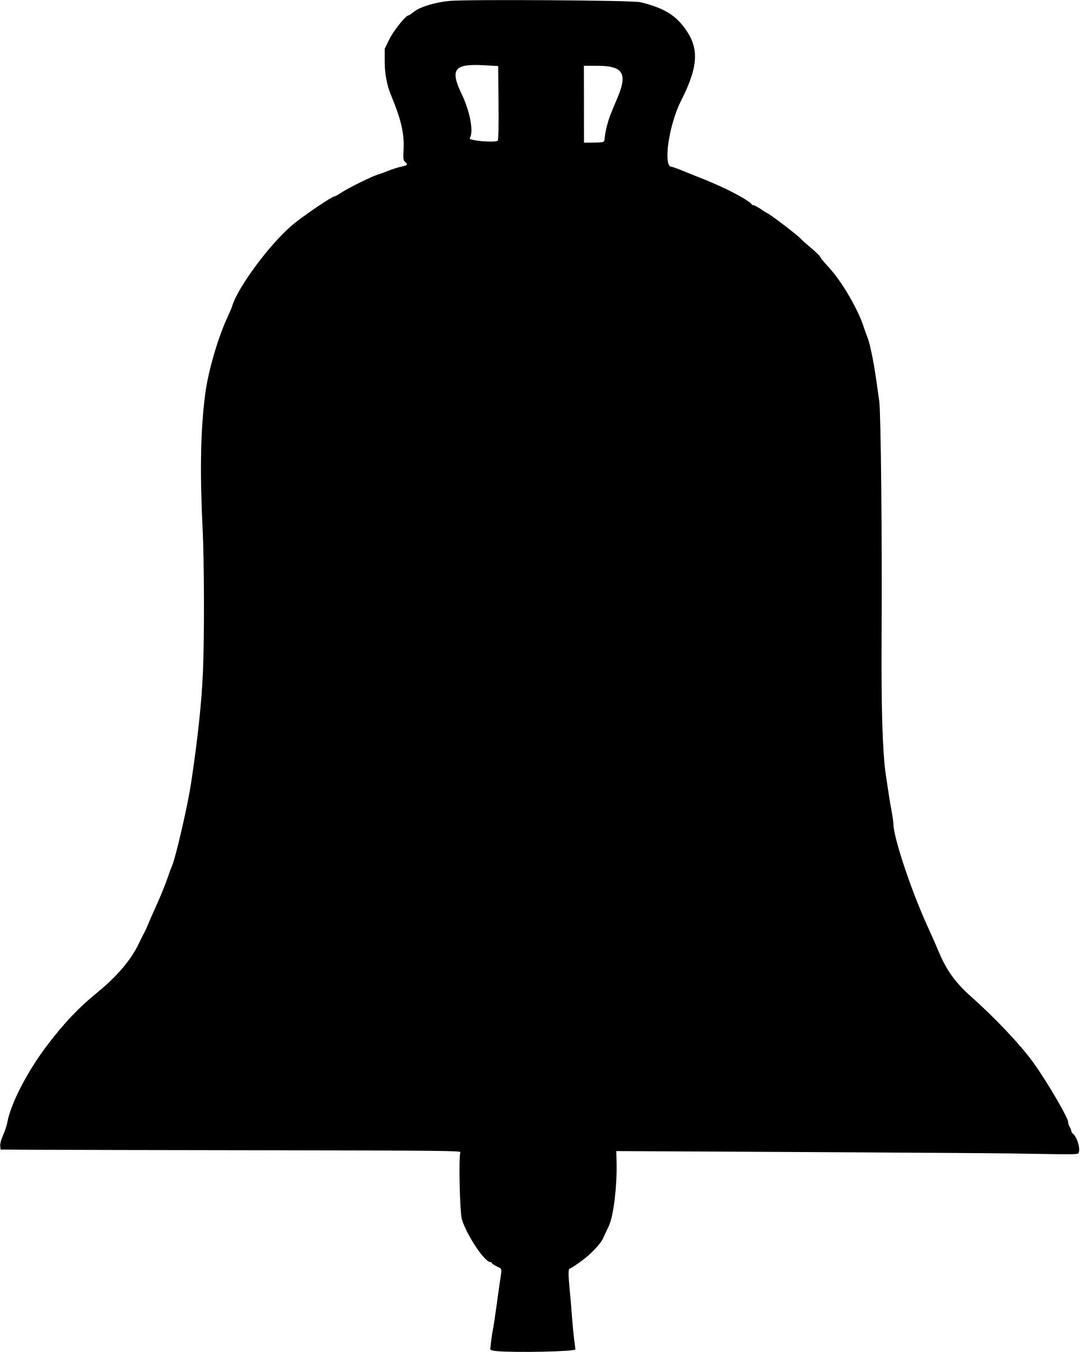 Bell 2 silhouette png transparent